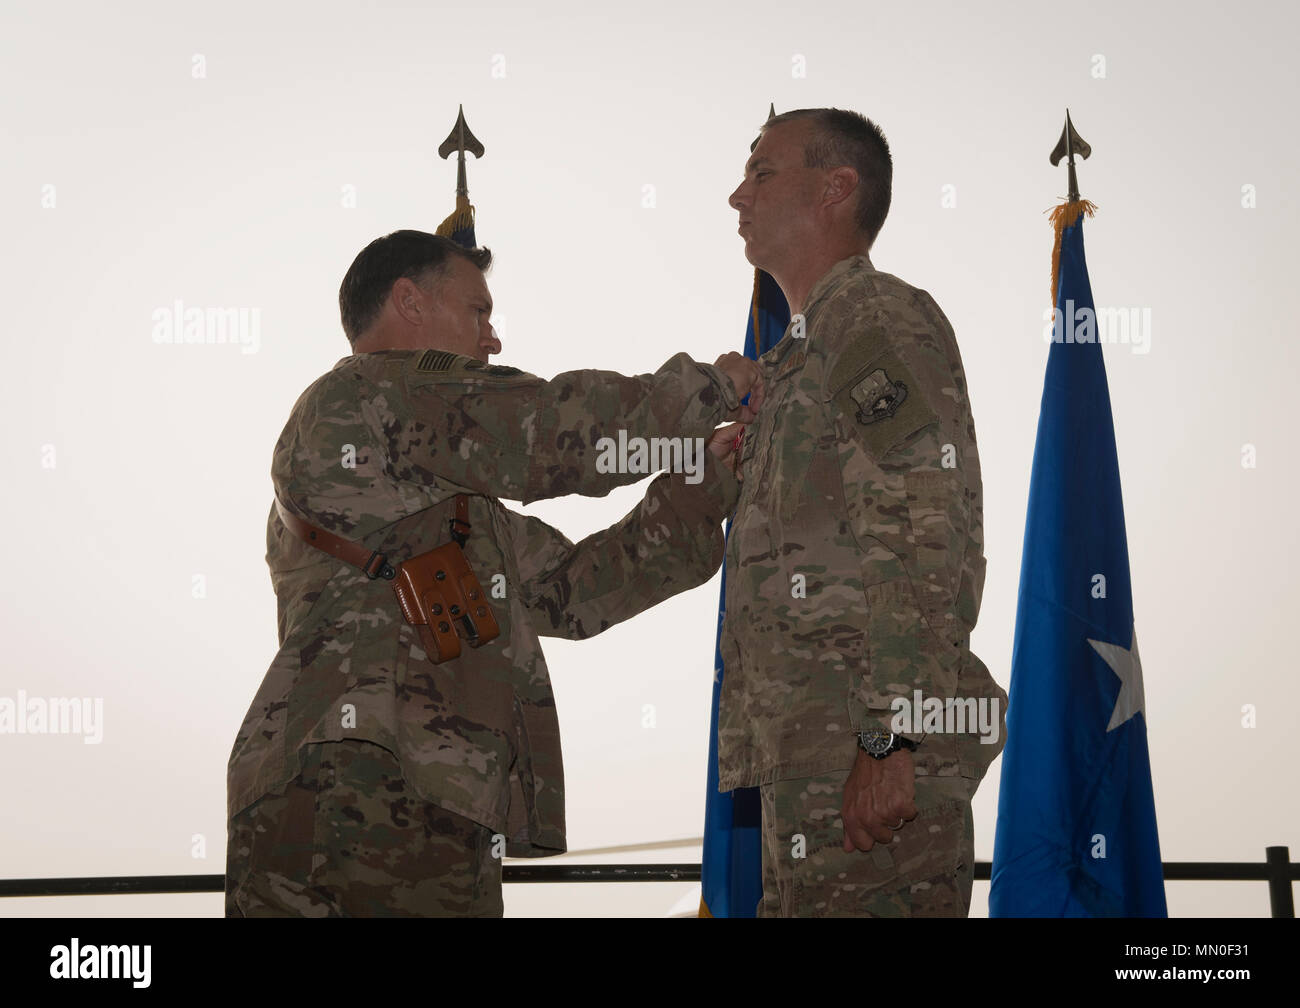 Col. Craig Lucey, the outgoing 451st Air Expeditionary Group commander, receives the Bronze Star Medal from Brig. Gen. Craig Baker, the 455th Air Expeditionary Wing commander, during the 451st AEG change of command ceremony at Kandahar Airfield, Afghanistan, Aug. 2, 2017. Lucey commanded the 451st AEG for the last 12 months. During his time as commander, he led Airmen and civilians from four squadrons and managed the second largest airfield in Afghanistan. (U.S. Air Force photo by Staff Sgt. Benjamin Gonsier) Stock Photo